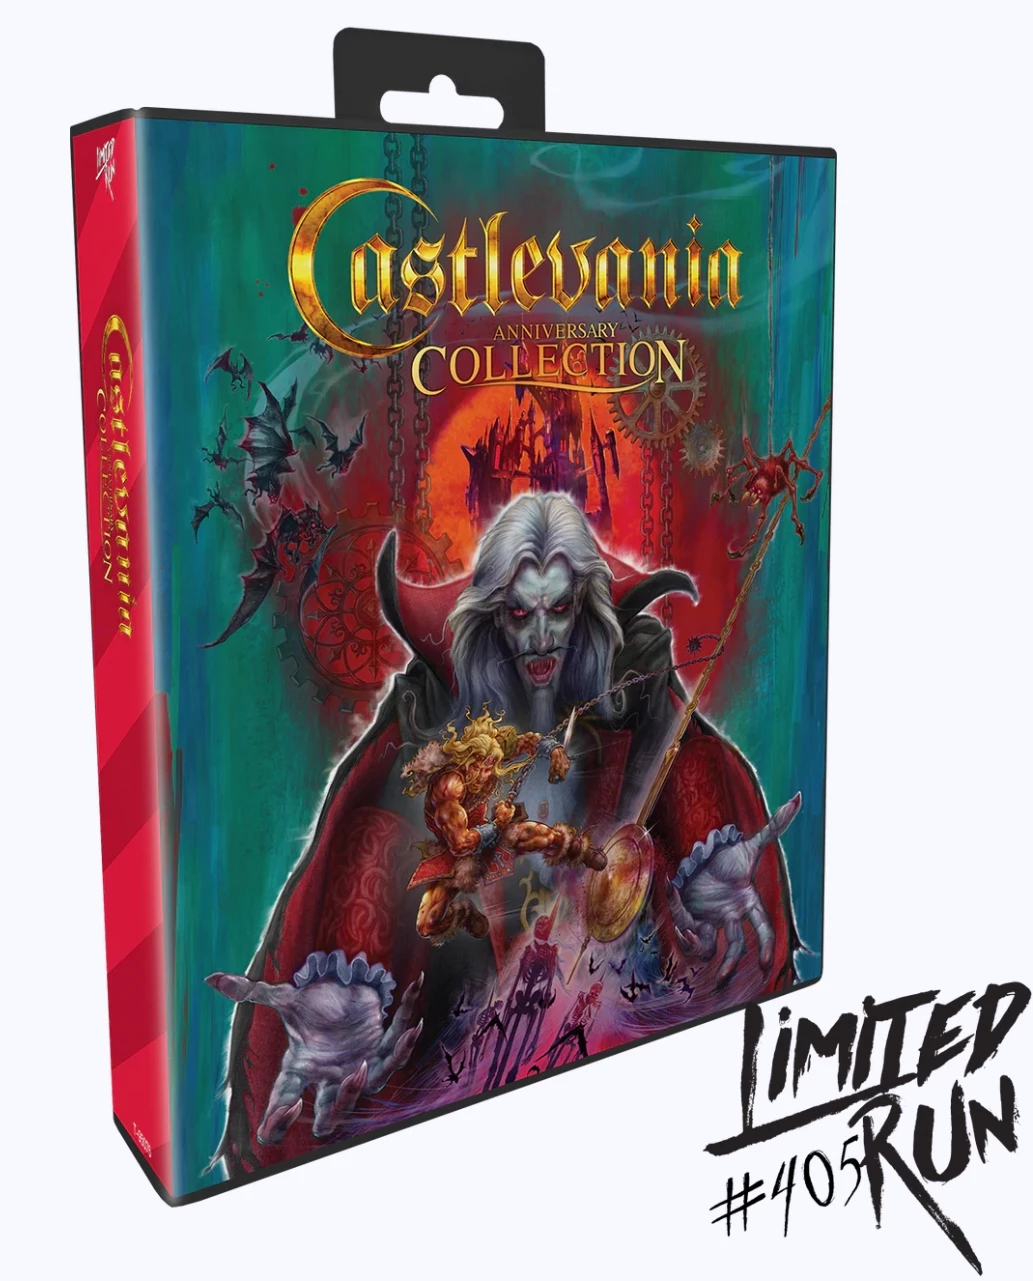 Castlevania - Anniversary Collection - Bloodlines Edition (Limited Run) (PS4), Konami